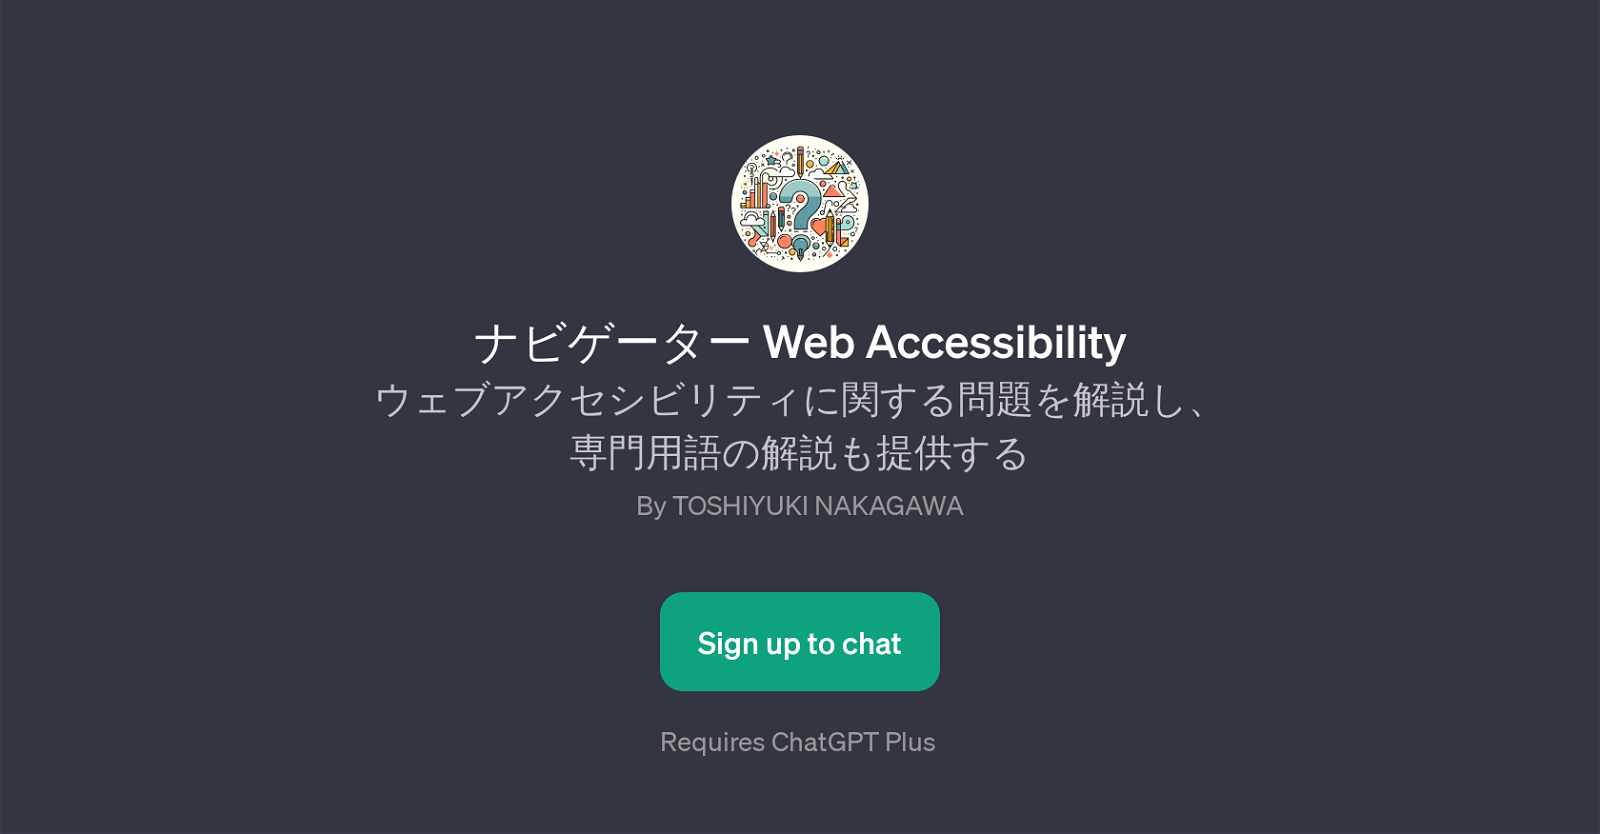 Web Accessibility website